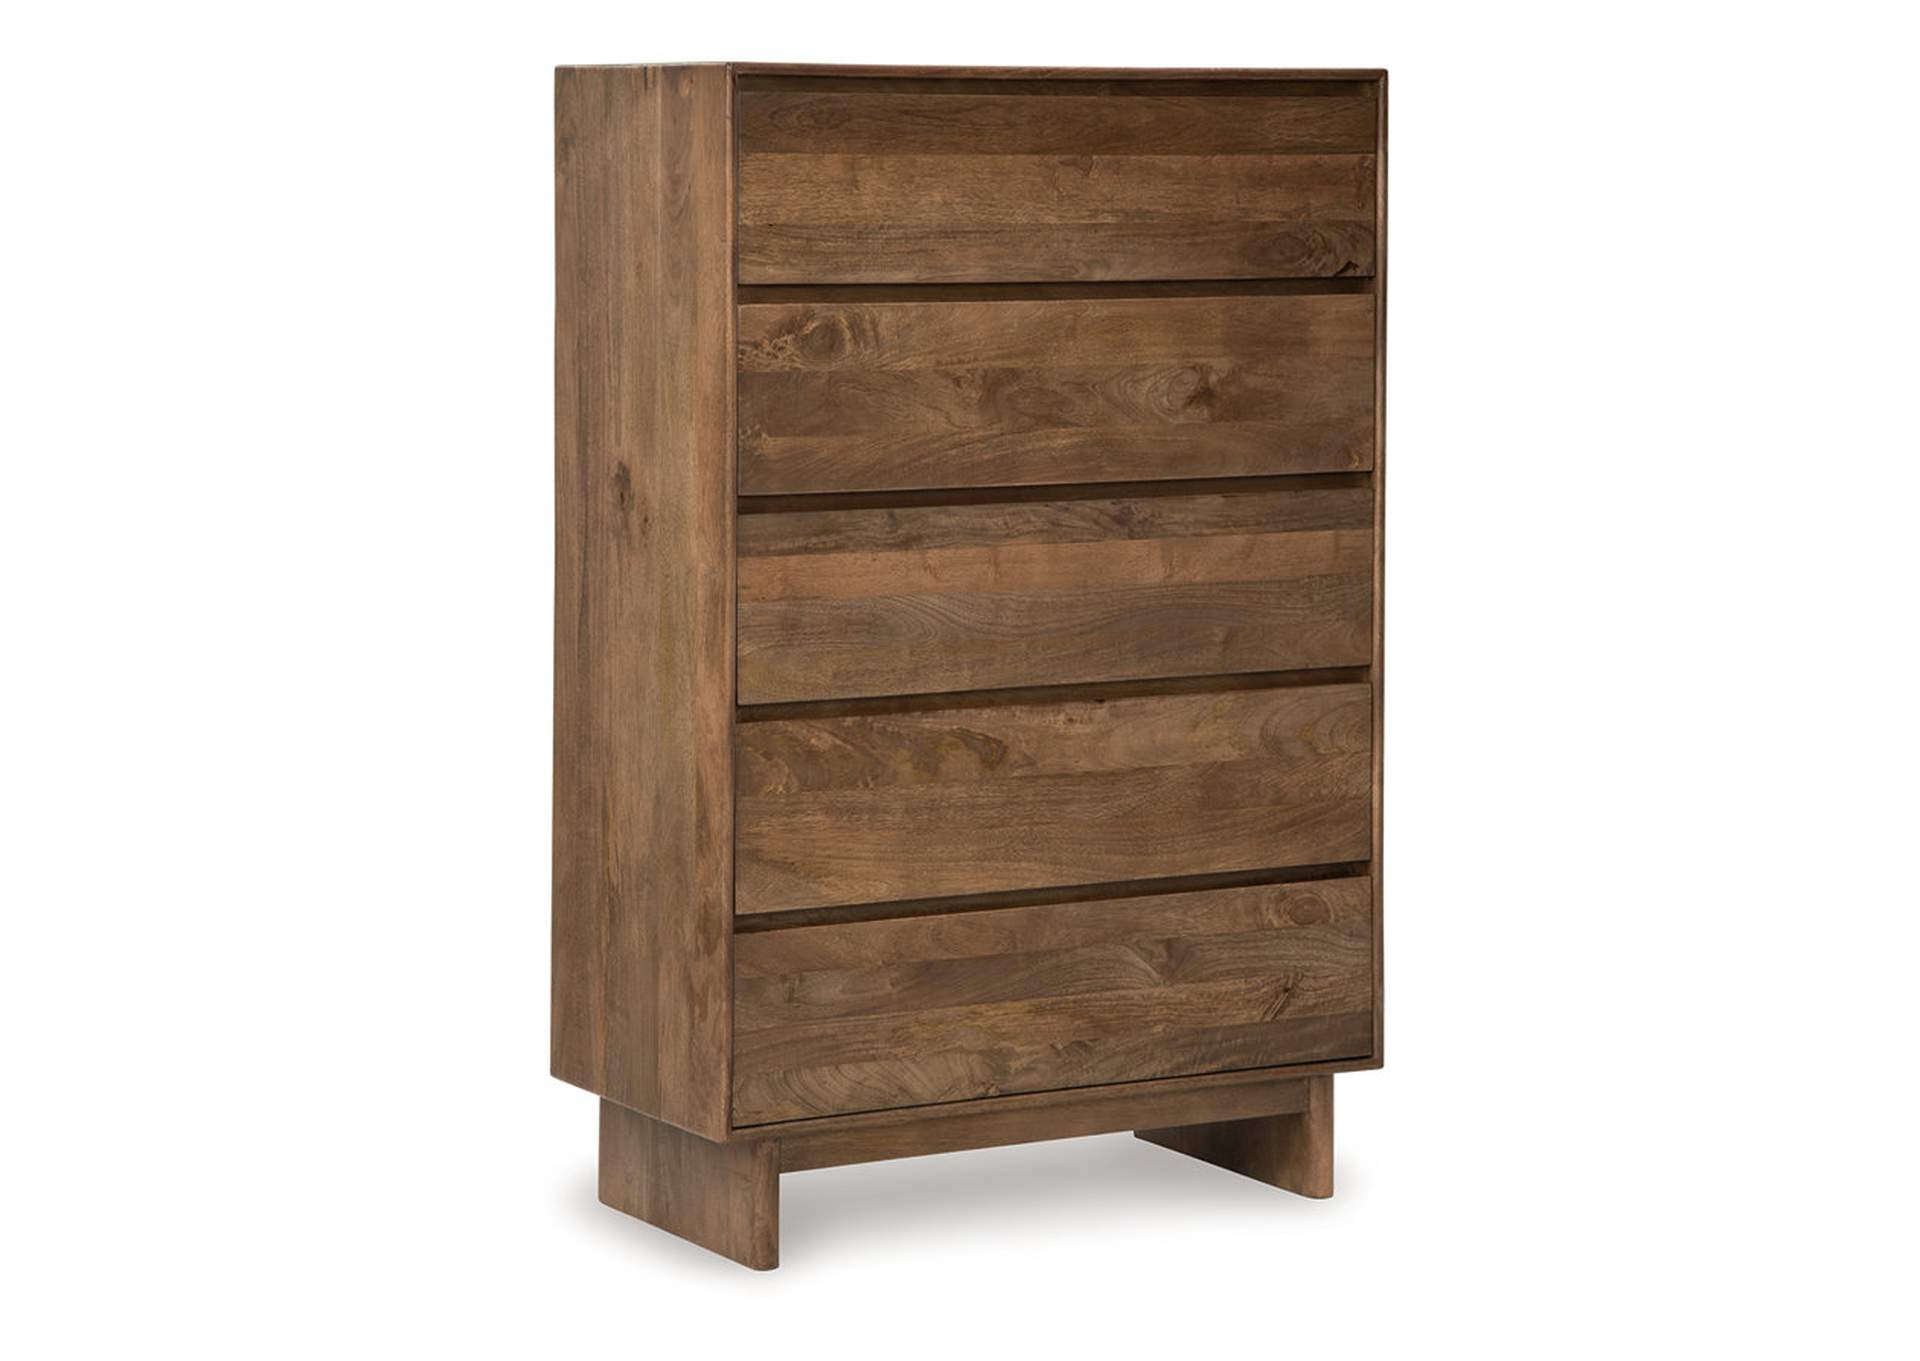 Isanti Chest of Drawers,Millennium